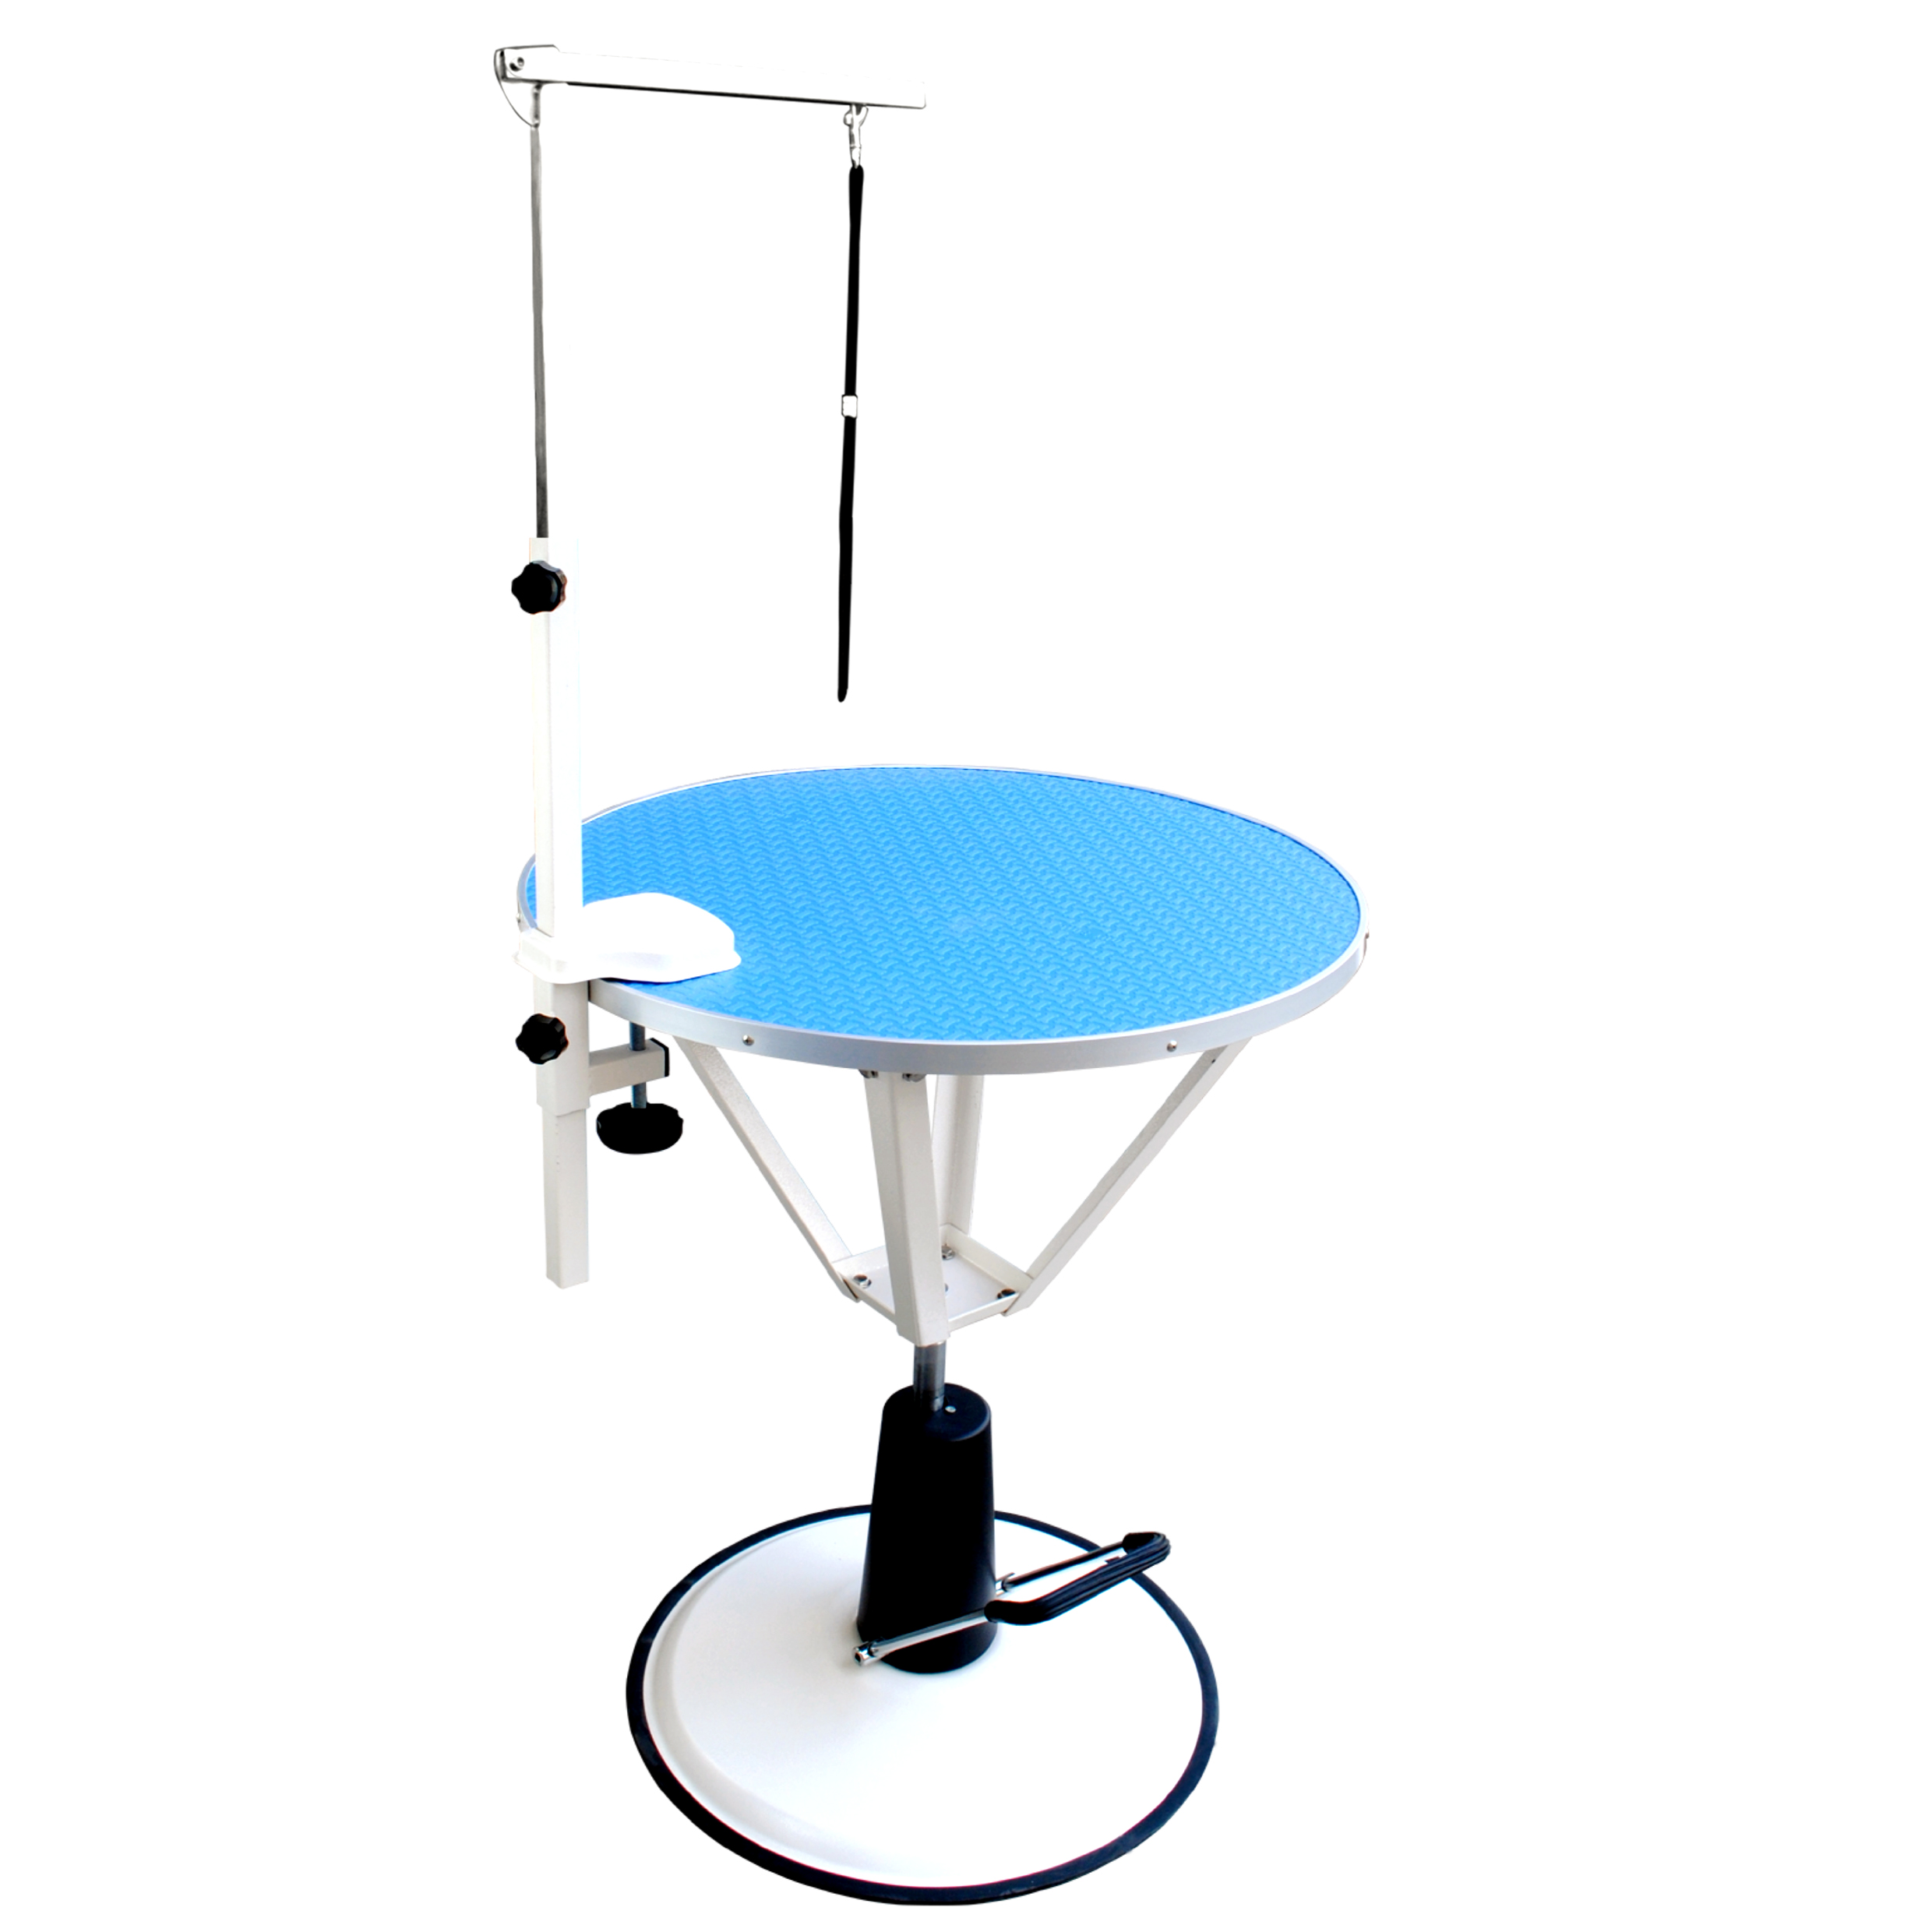 Grooming Tables for Styling With Hydraulic Lift 93 Cms